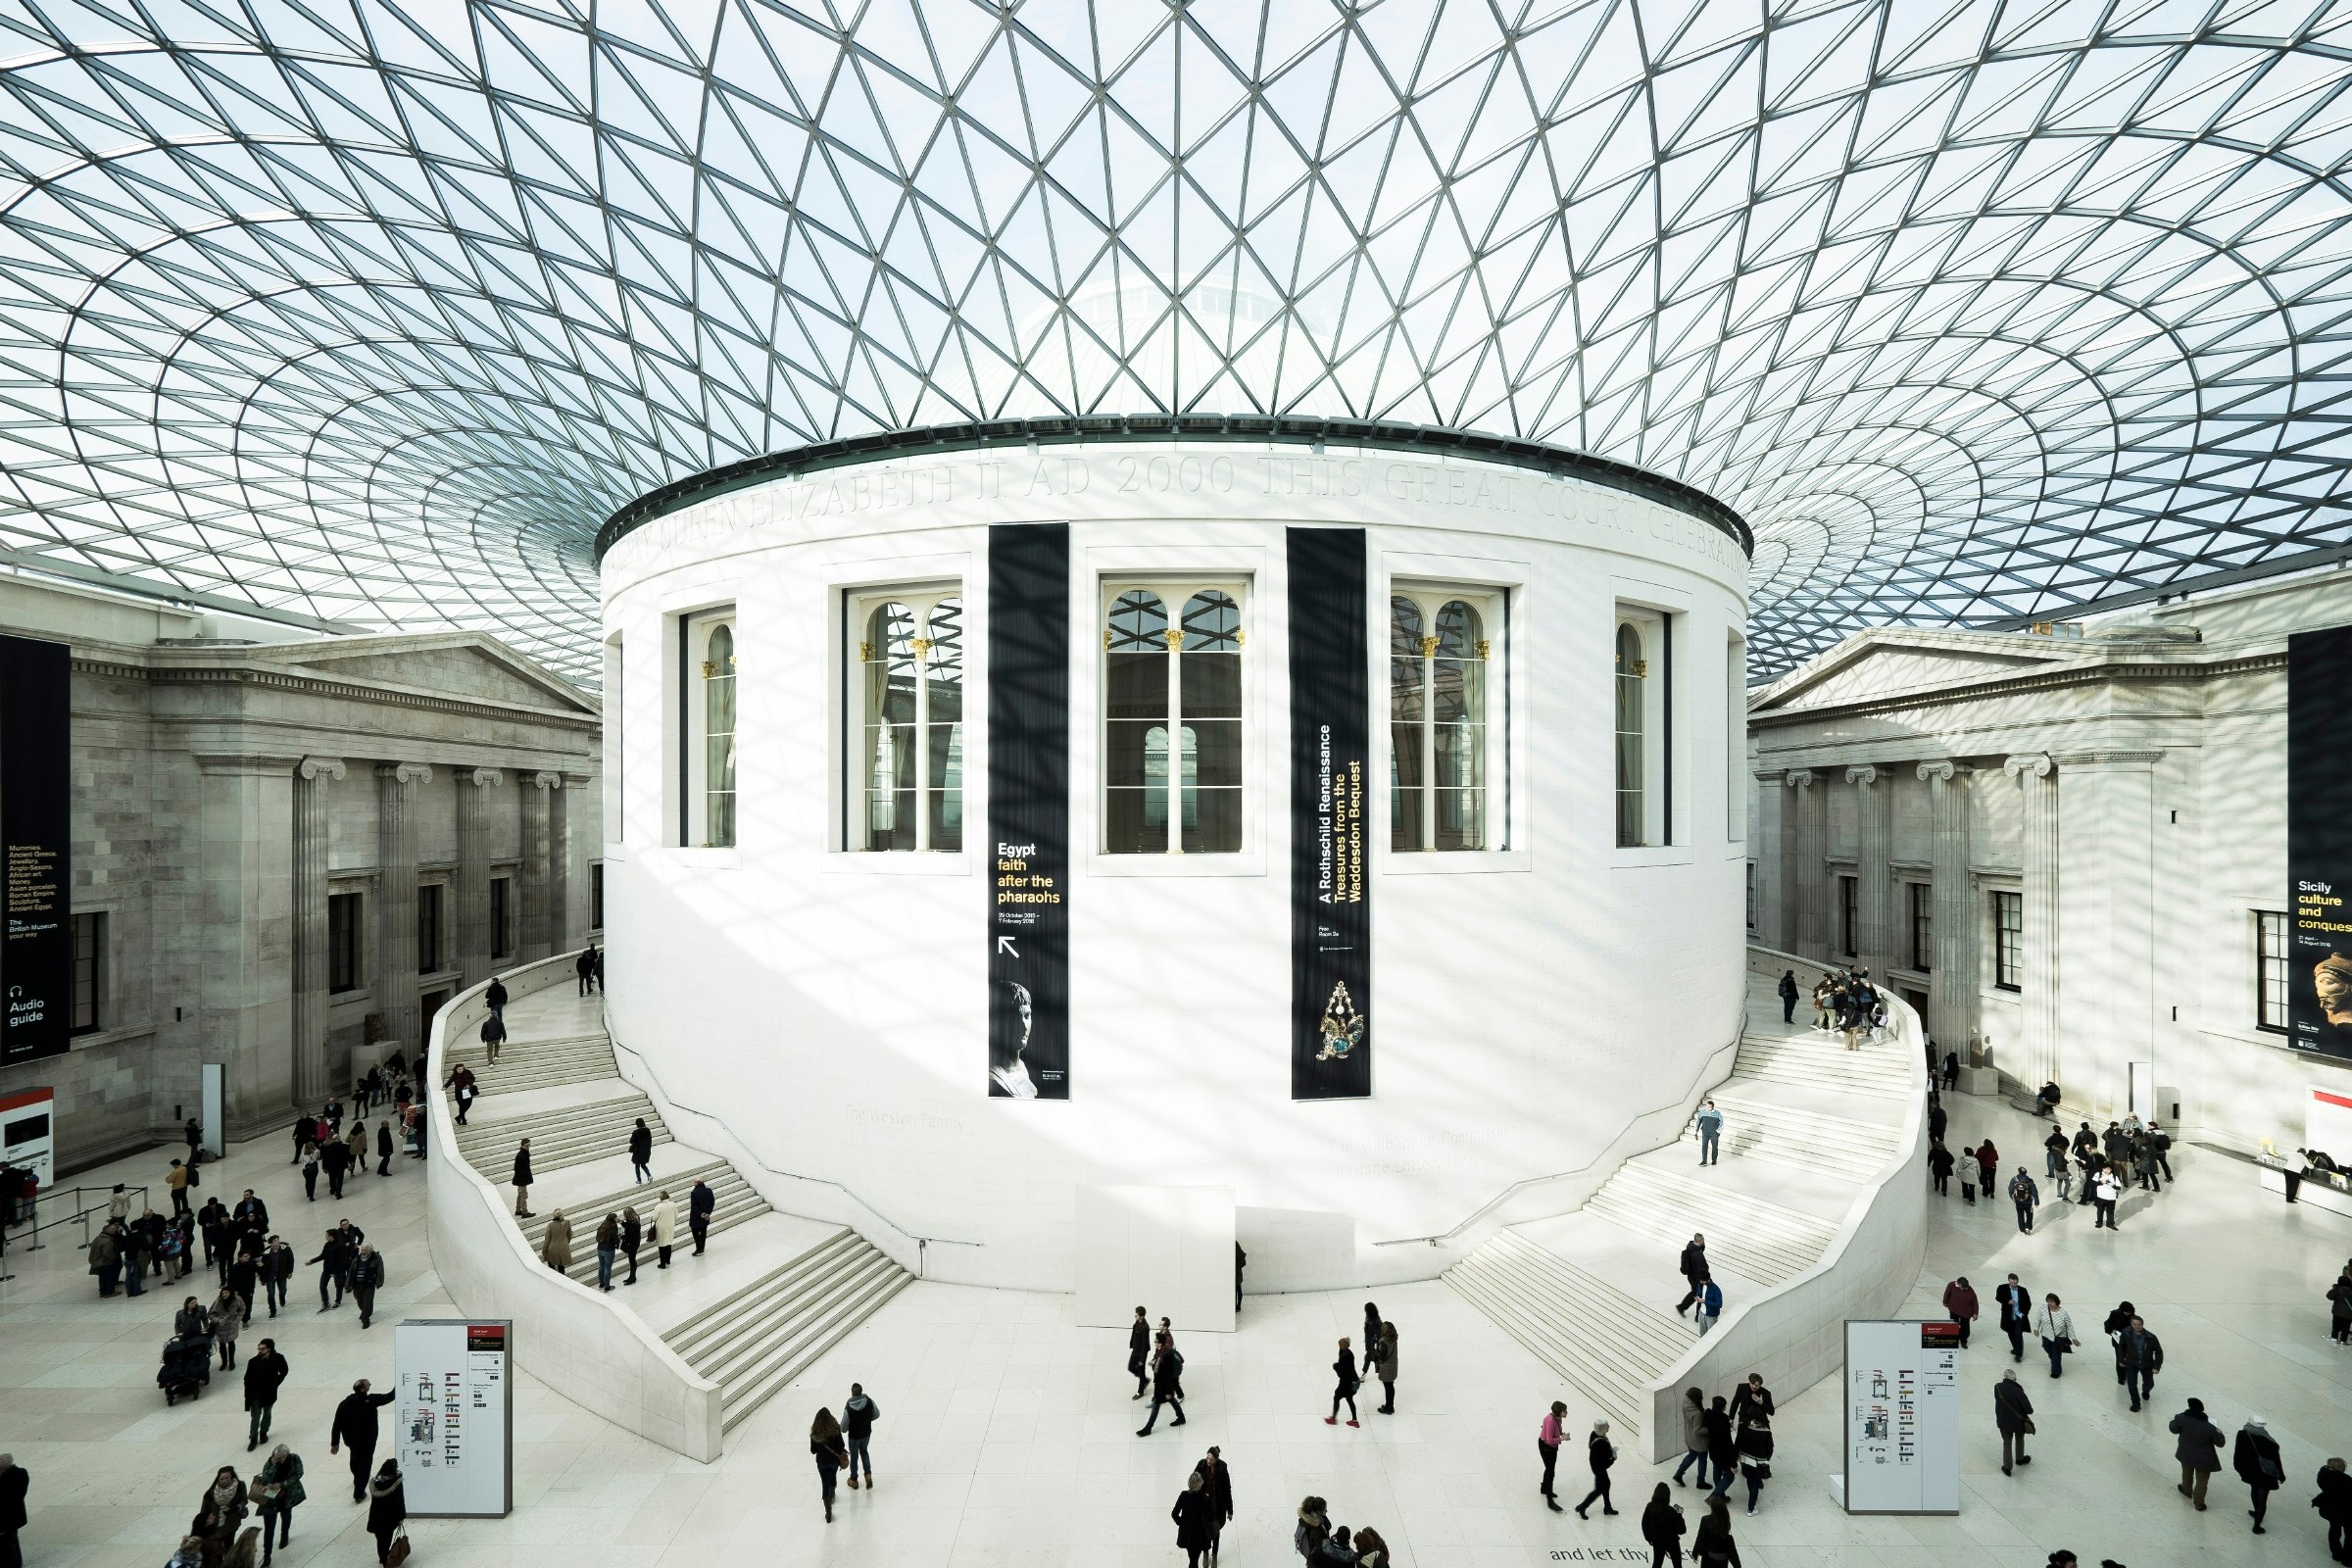 Sun illuminates the Great Court of the British Museum in pure white as it dives through the glass roof onto visitors who, lithe like L. S. Lowry's great subjects, climb the circular stairs or mill around on the ground floor